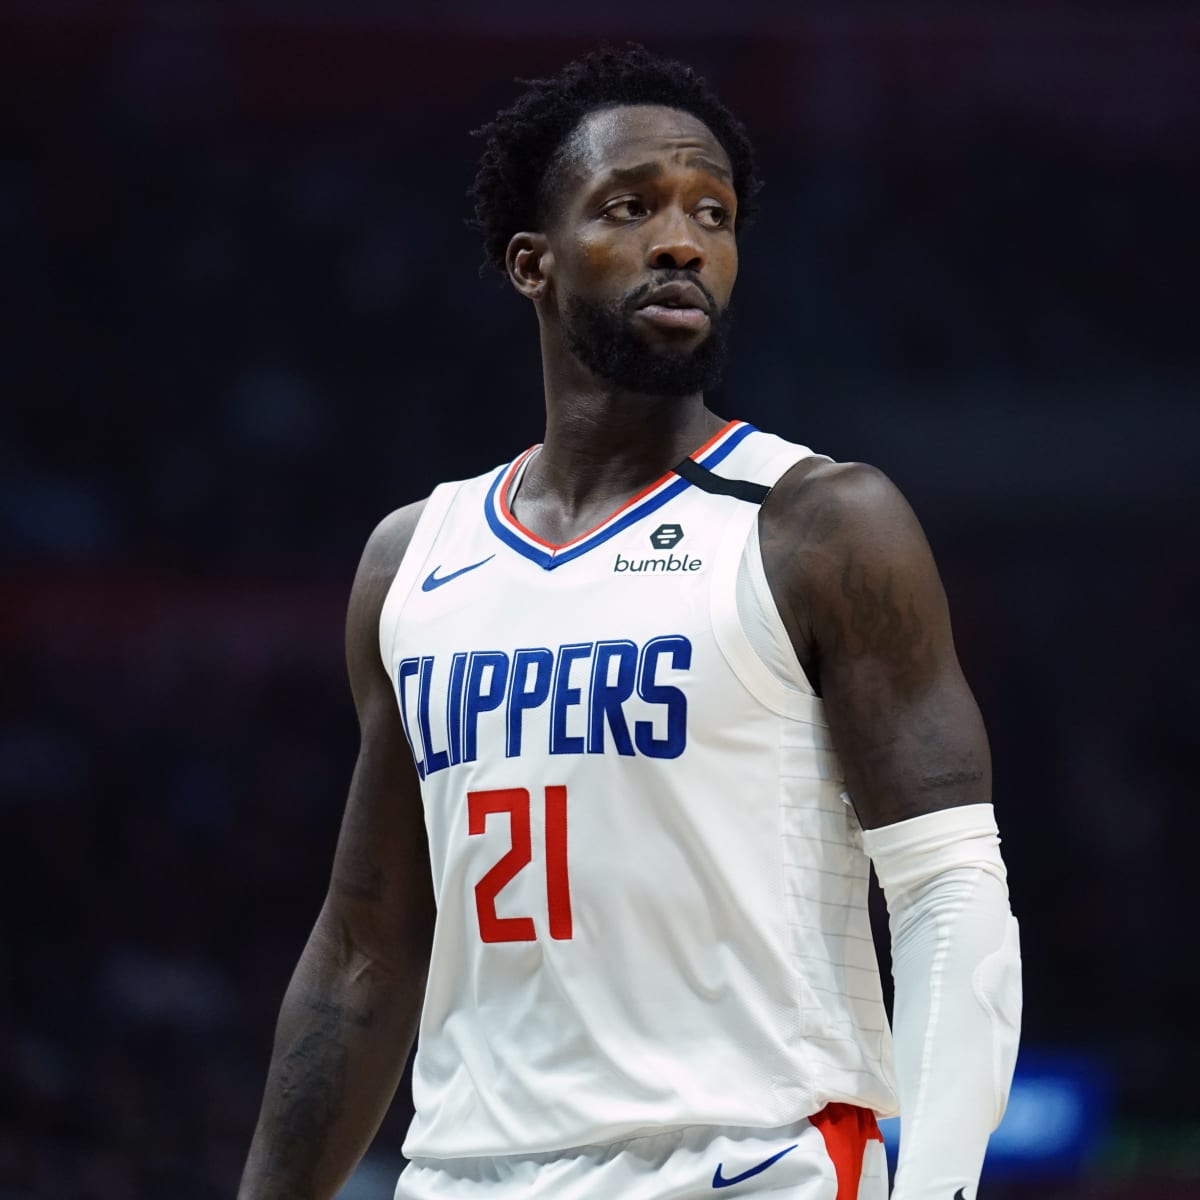 NBA bubble fits Clippers' Patrick Beverley to a 'T' - Los Angeles